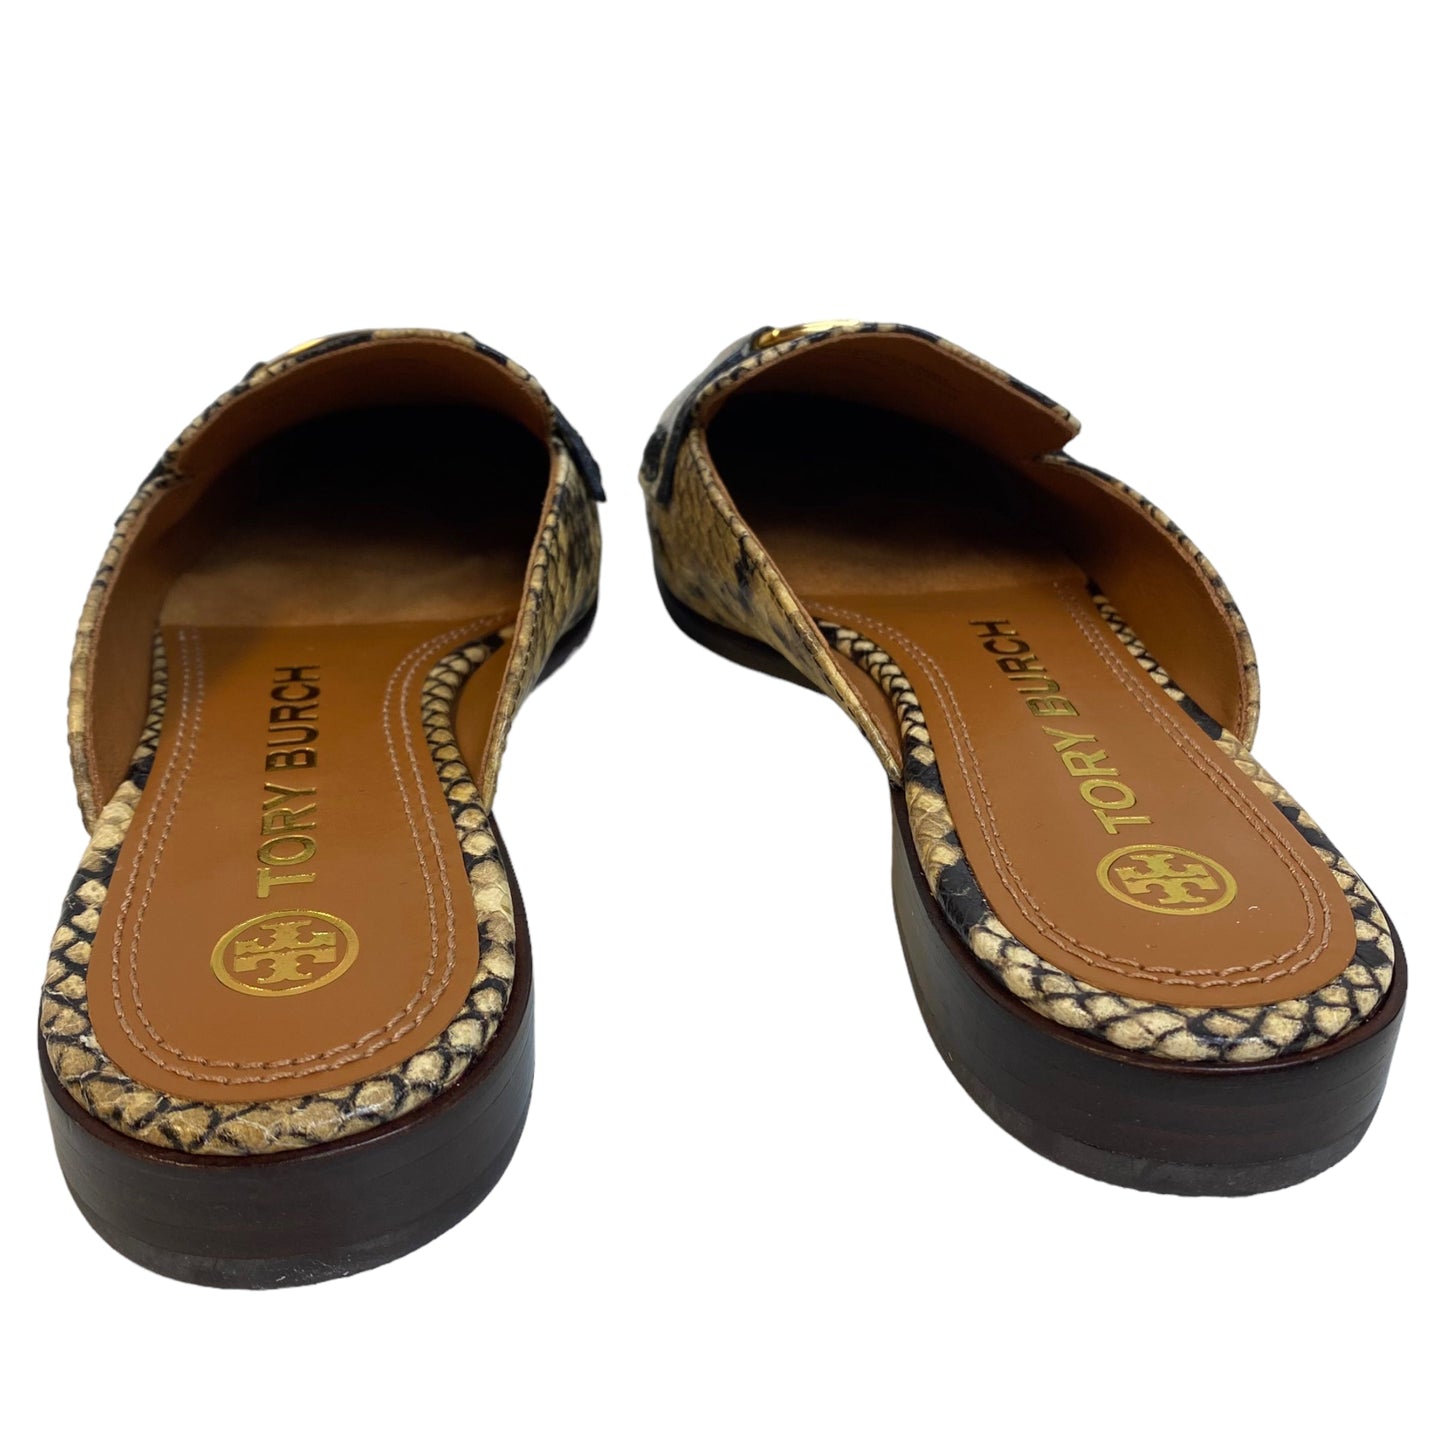 Shoes Flats Mule & Slide Designer By Tory Burch  Size: 10